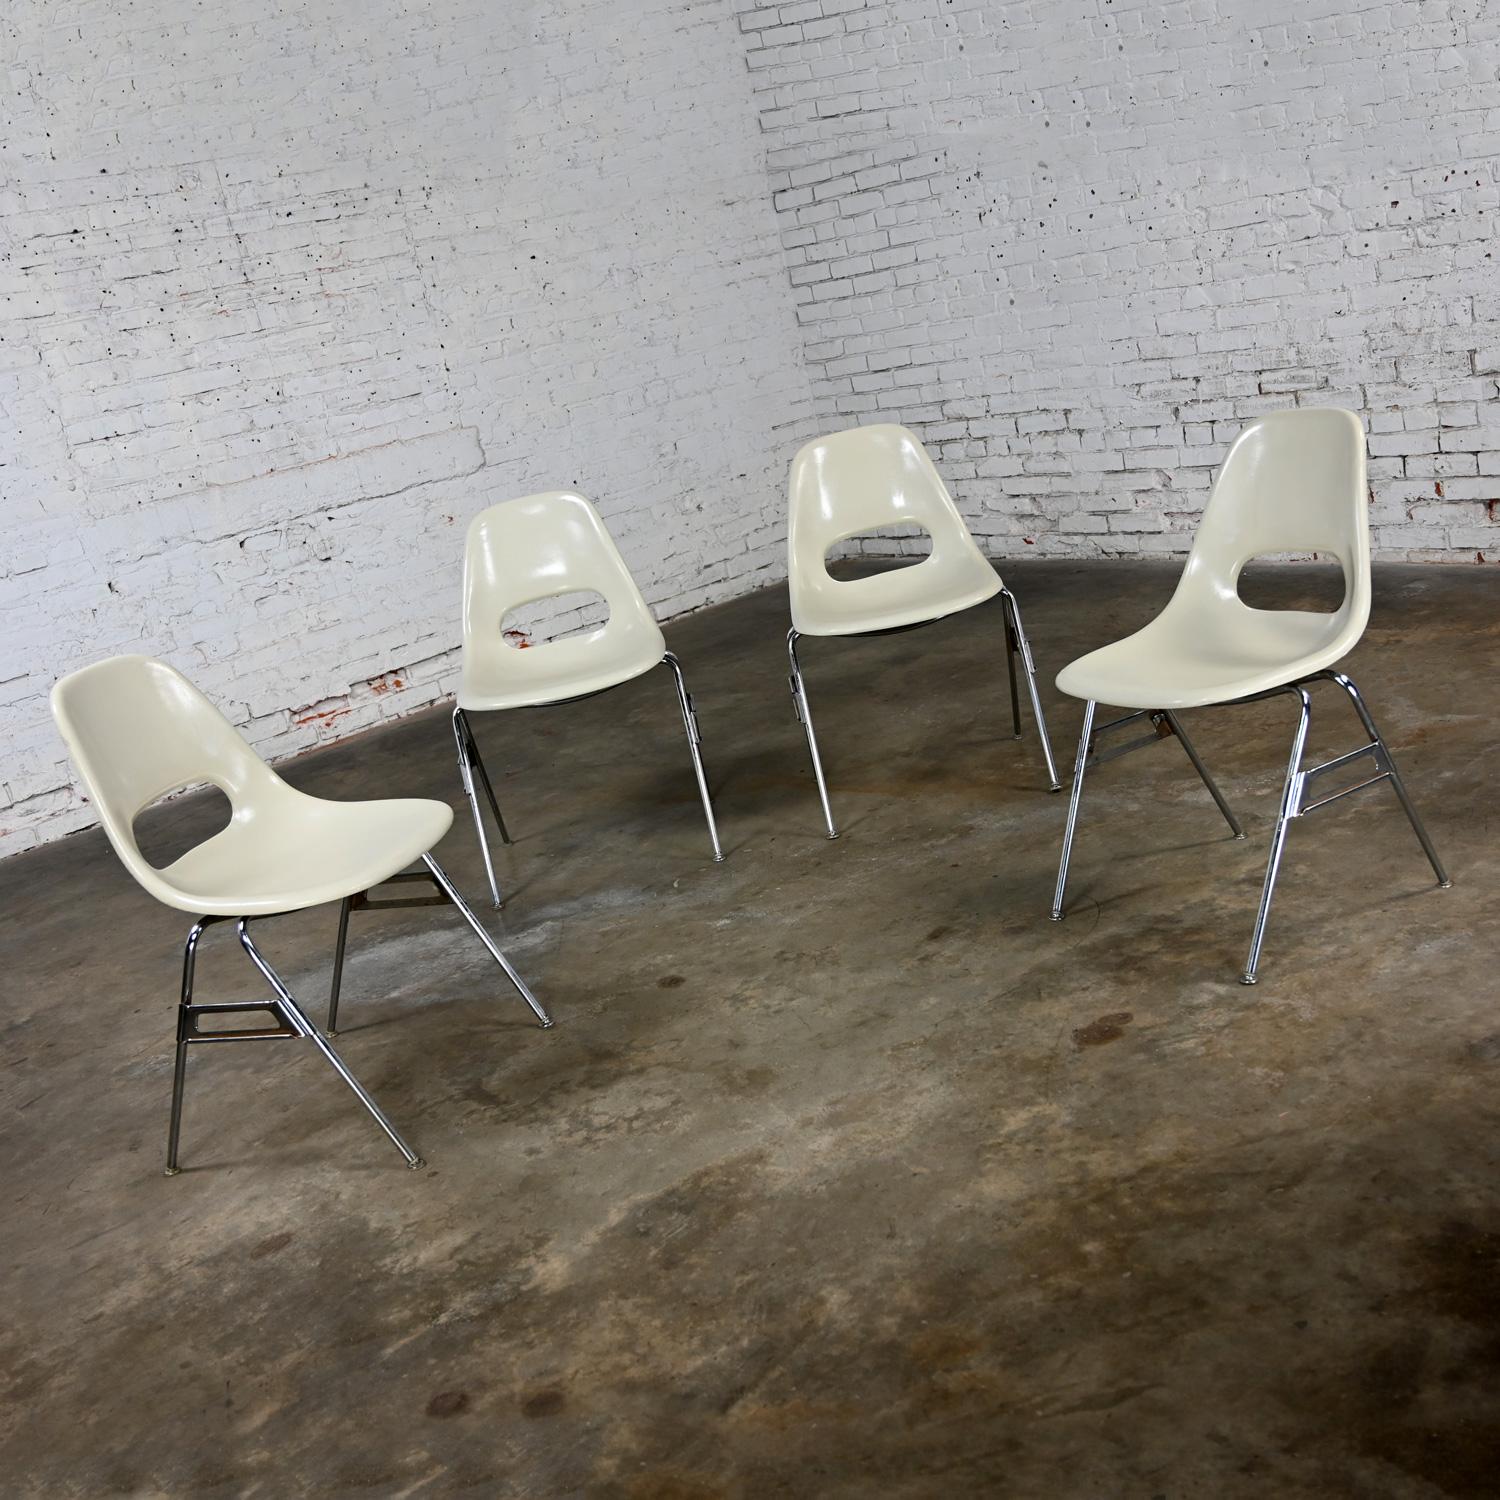 Handsome vintage Mid-Century Modern Krueger International white molded fiberglass shells & chrome tube base stacking chairs, set of 4. Beautiful condition, keeping in mind that these are vintage and not new so will have signs of use and wear even if